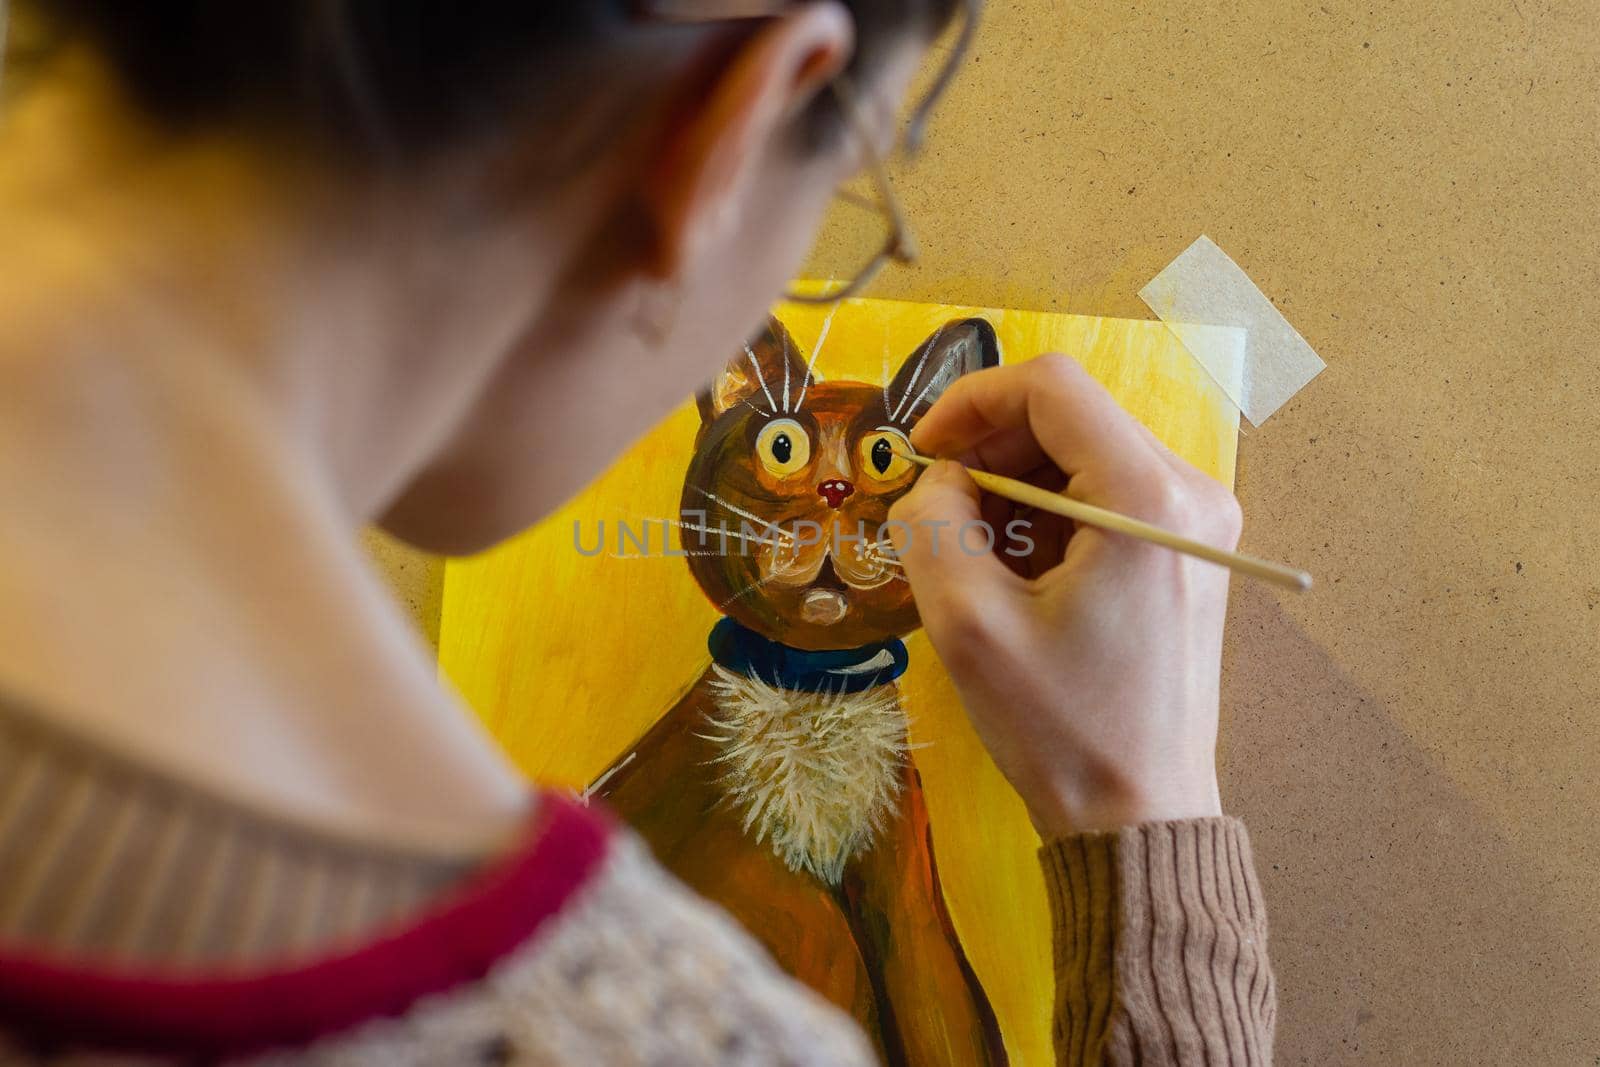 The artist paints a drawing of a cat on an easel with acrylic paints, a view from the artist's back